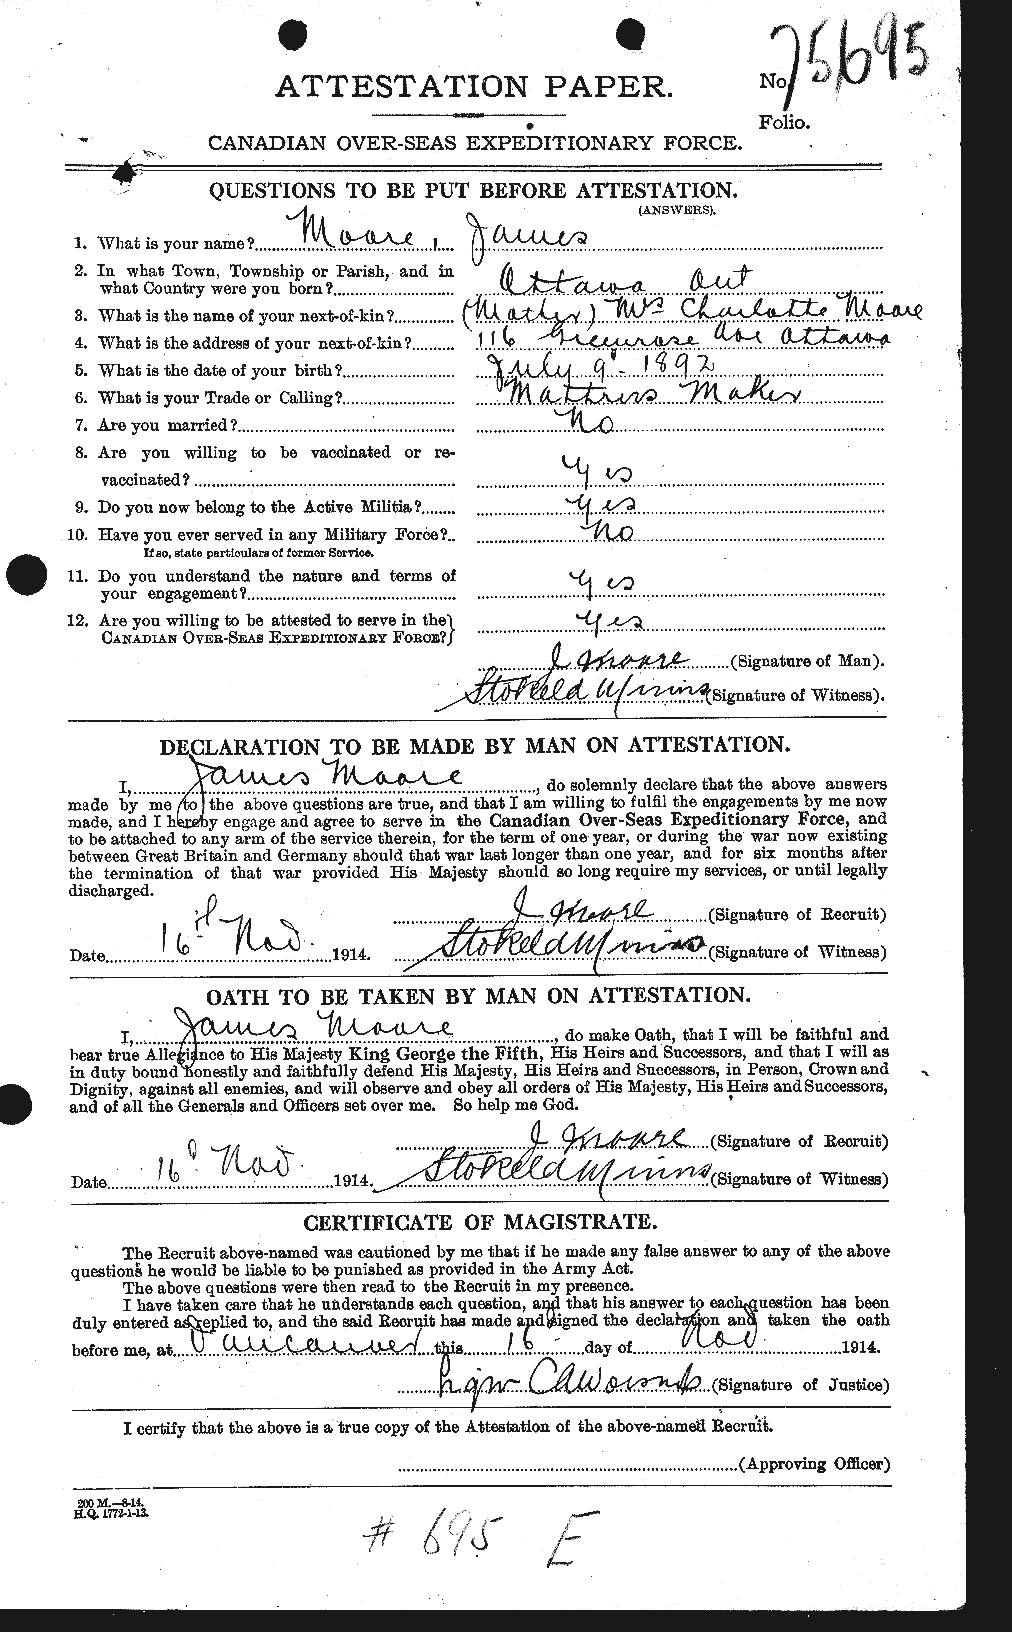 Personnel Records of the First World War - CEF 502175a